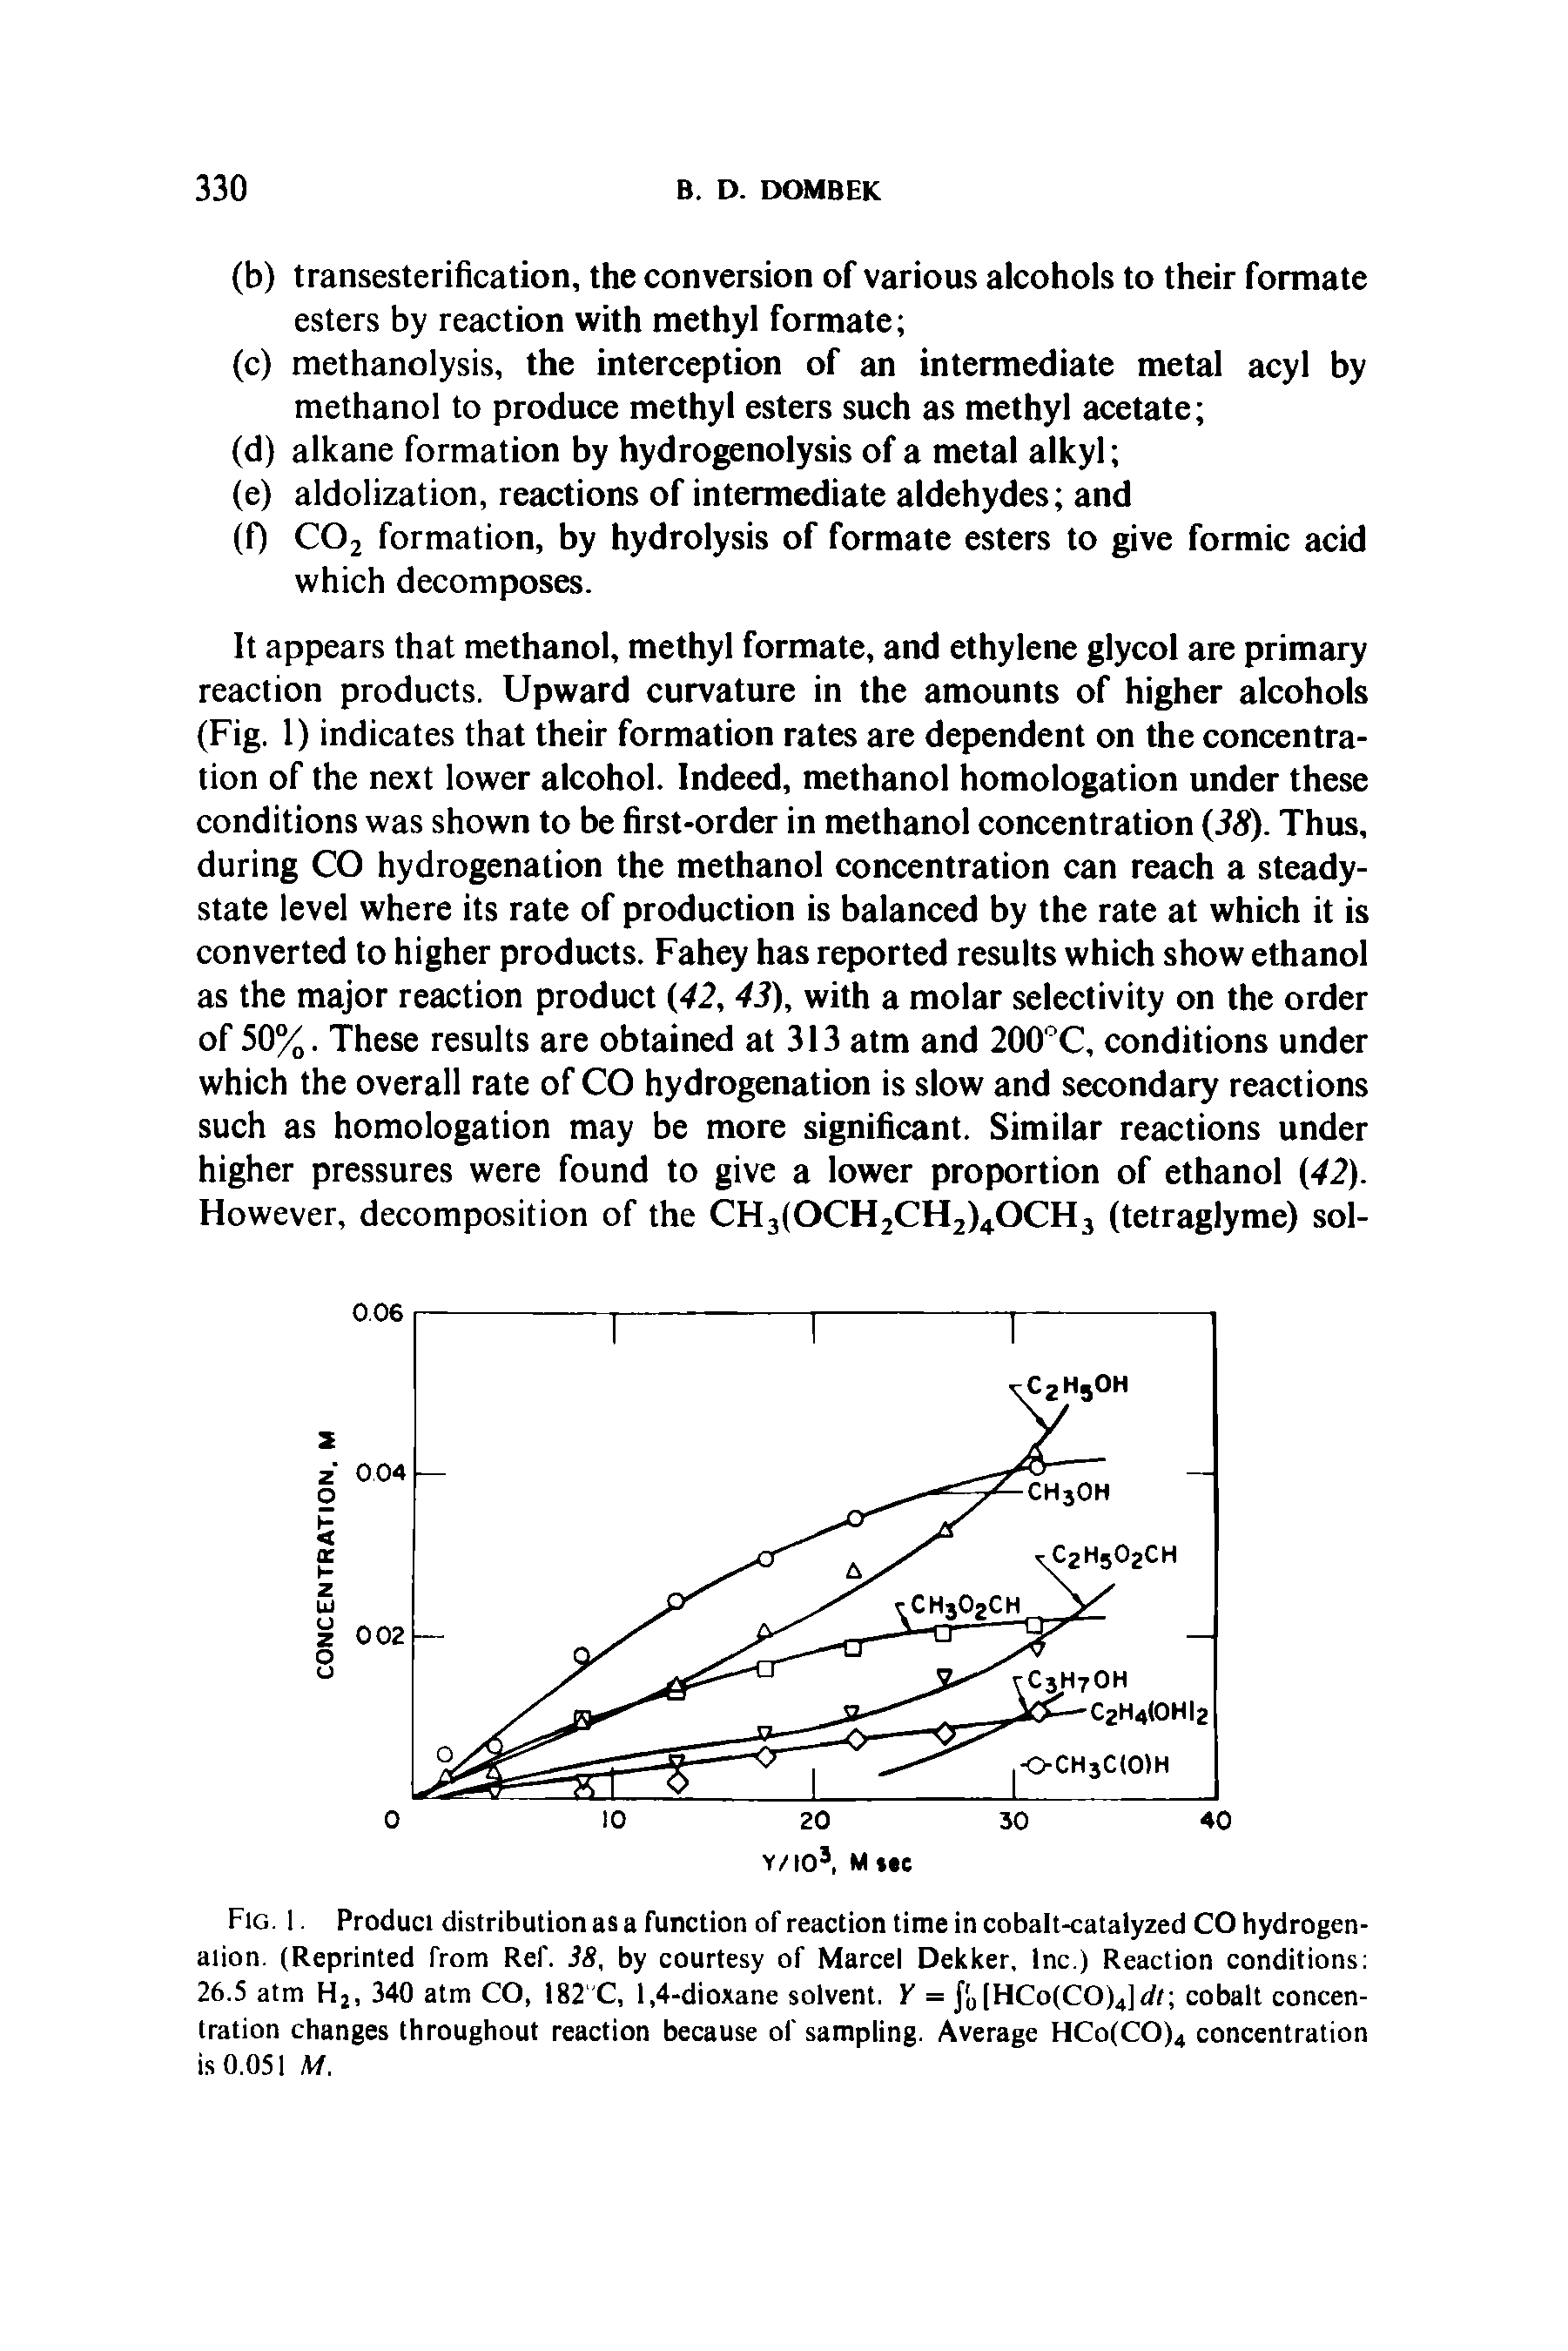 Fig. 1. Produci distribution as a function of reaction time in cobalt-catalyzed CO hydrogenation. (Reprinted from Ref. 38, by courtesy of Marcel Dekker, Inc.) Reaction conditions 26.5 atm H2, 340 atm CO, 182 C, 1,4-dioxane solvent. Y = J 0[HCo(CO)4]dt cobalt concentration changes throughout reaction because of sampling. Average HCo(CO)4 concentration is 0.051 M.